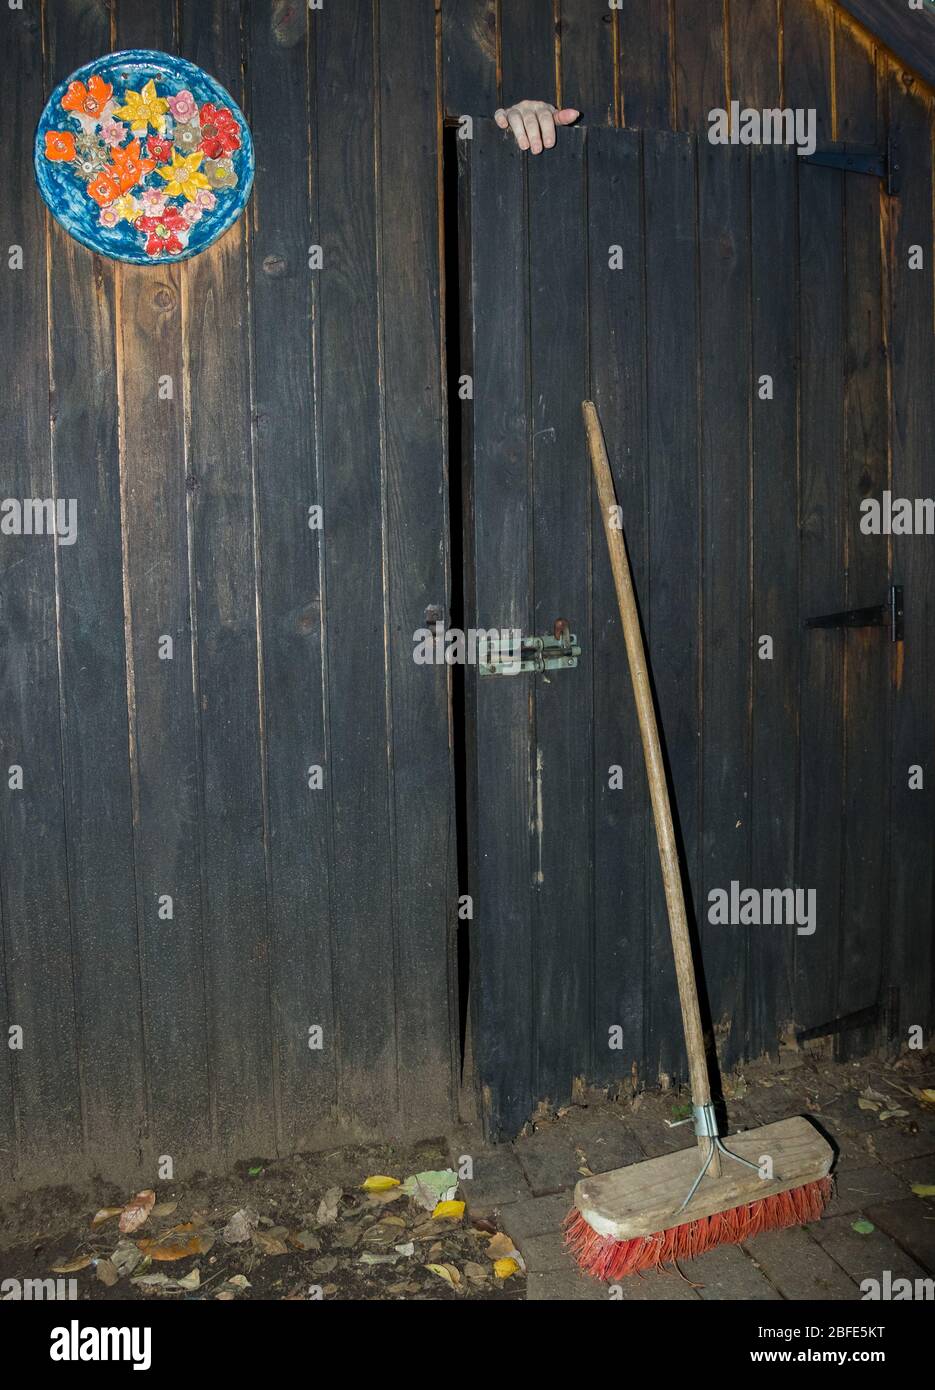 Caucasian hands stick out from behind an old and weathered wooden door kept closed with a broom trying to escape lockdown Stock Photo